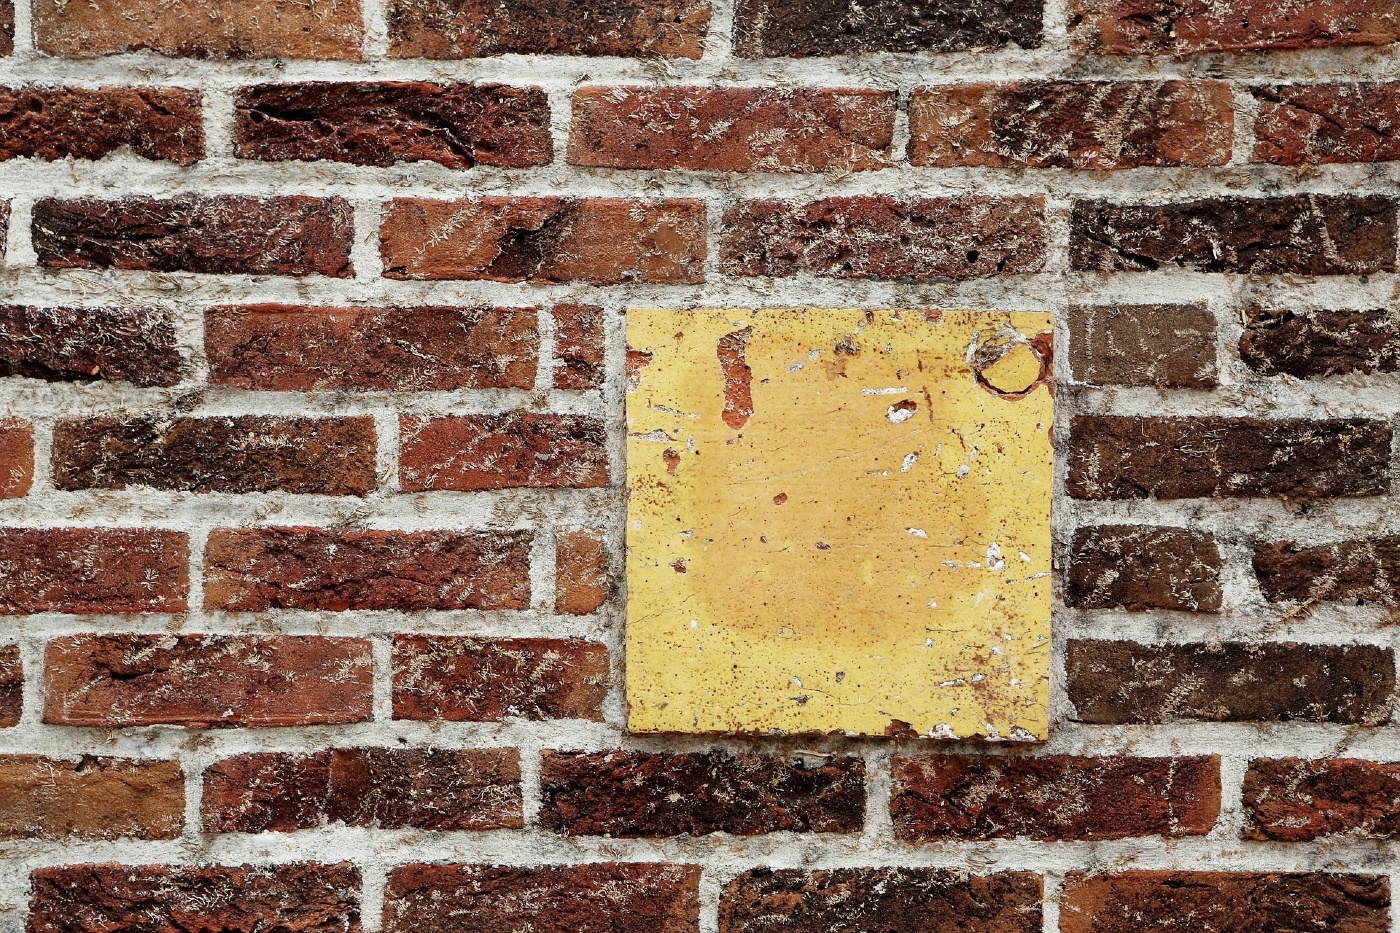 Yellow square on a brick wall.